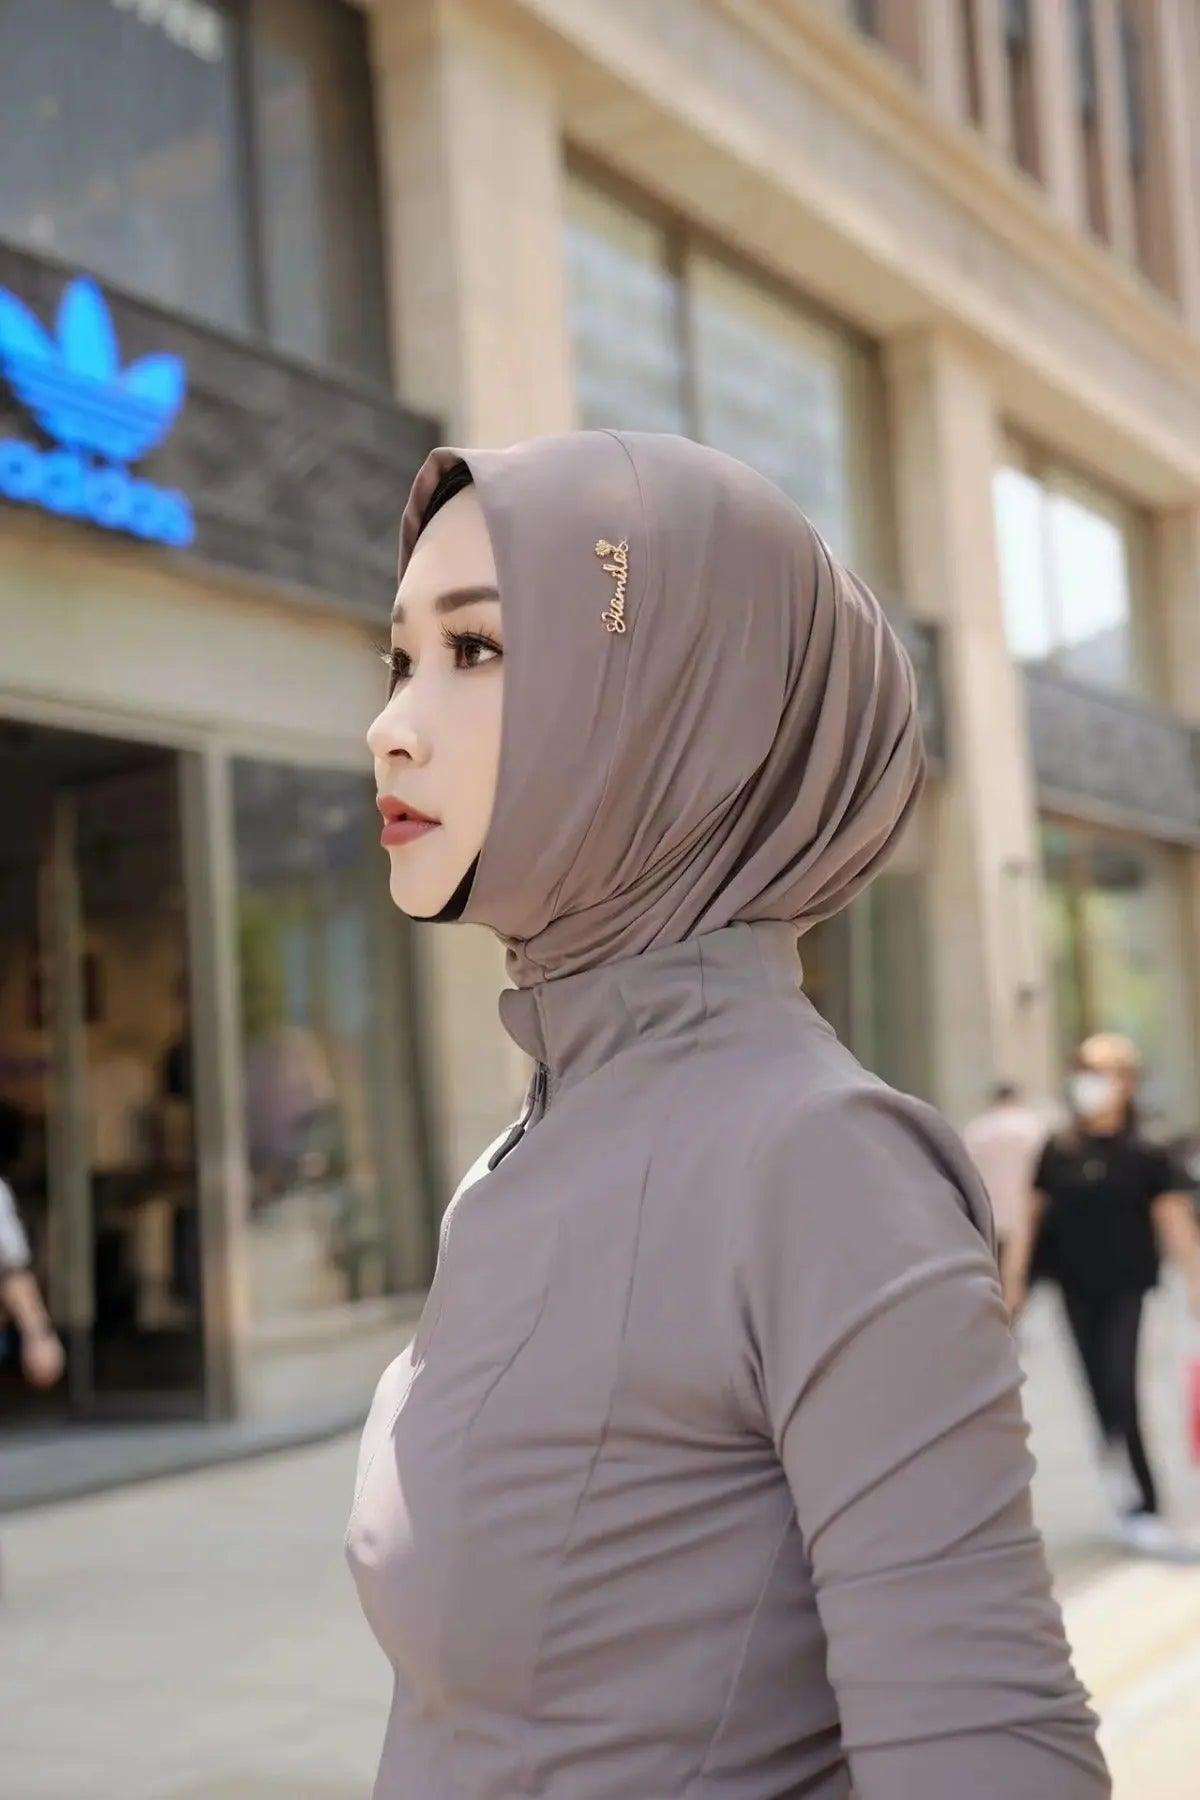 MH024 FlexFit Sport Hijab - Mariam's Collection